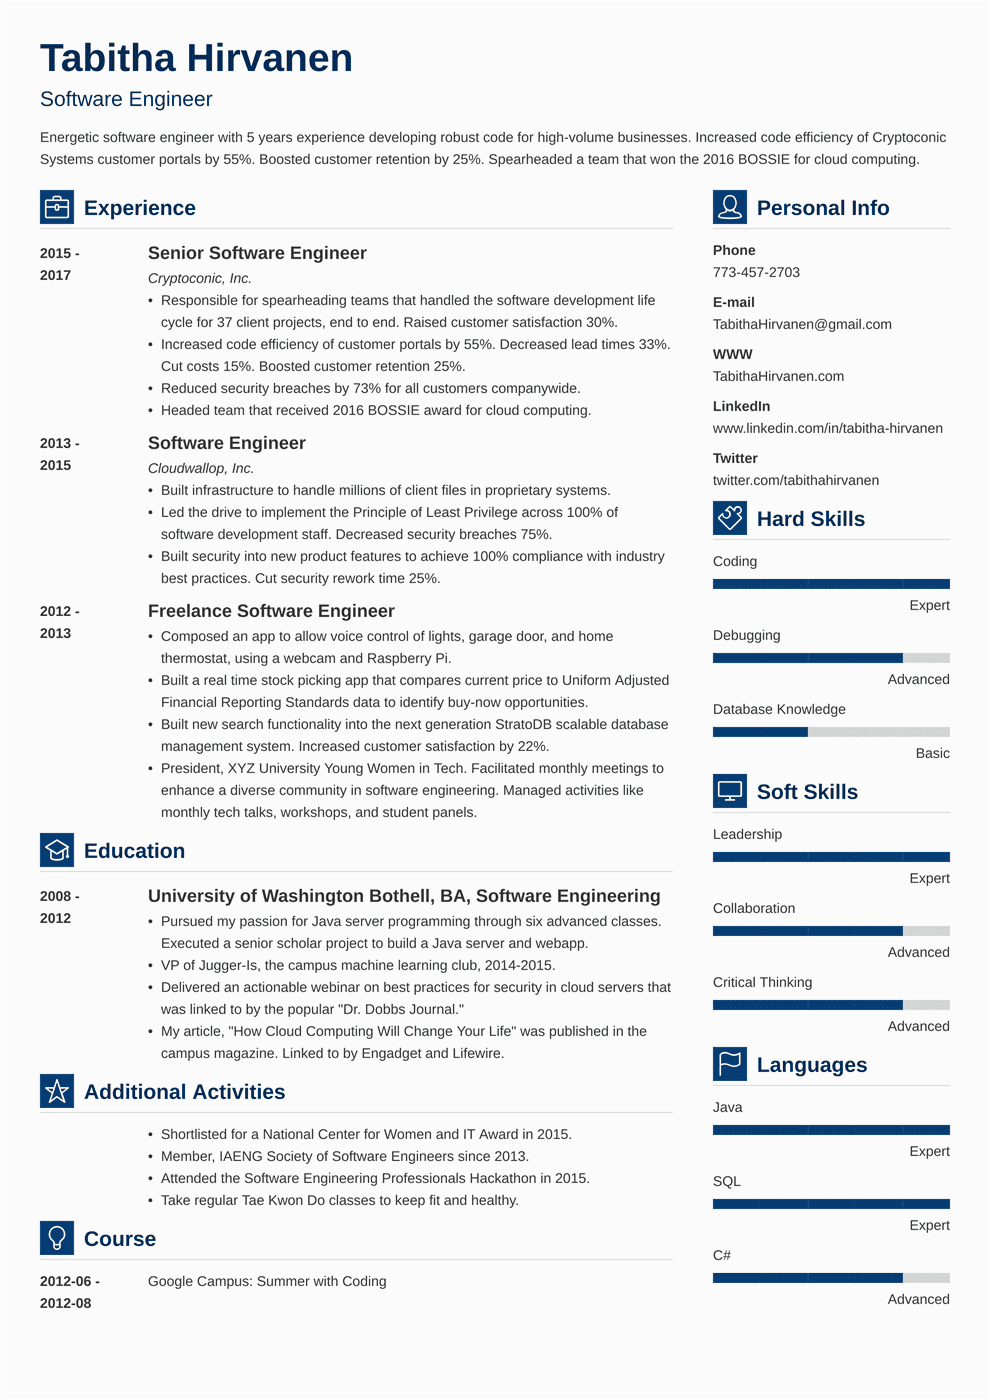 Resume Template for Experienced software Engineer Resume for Experienced software Engineer